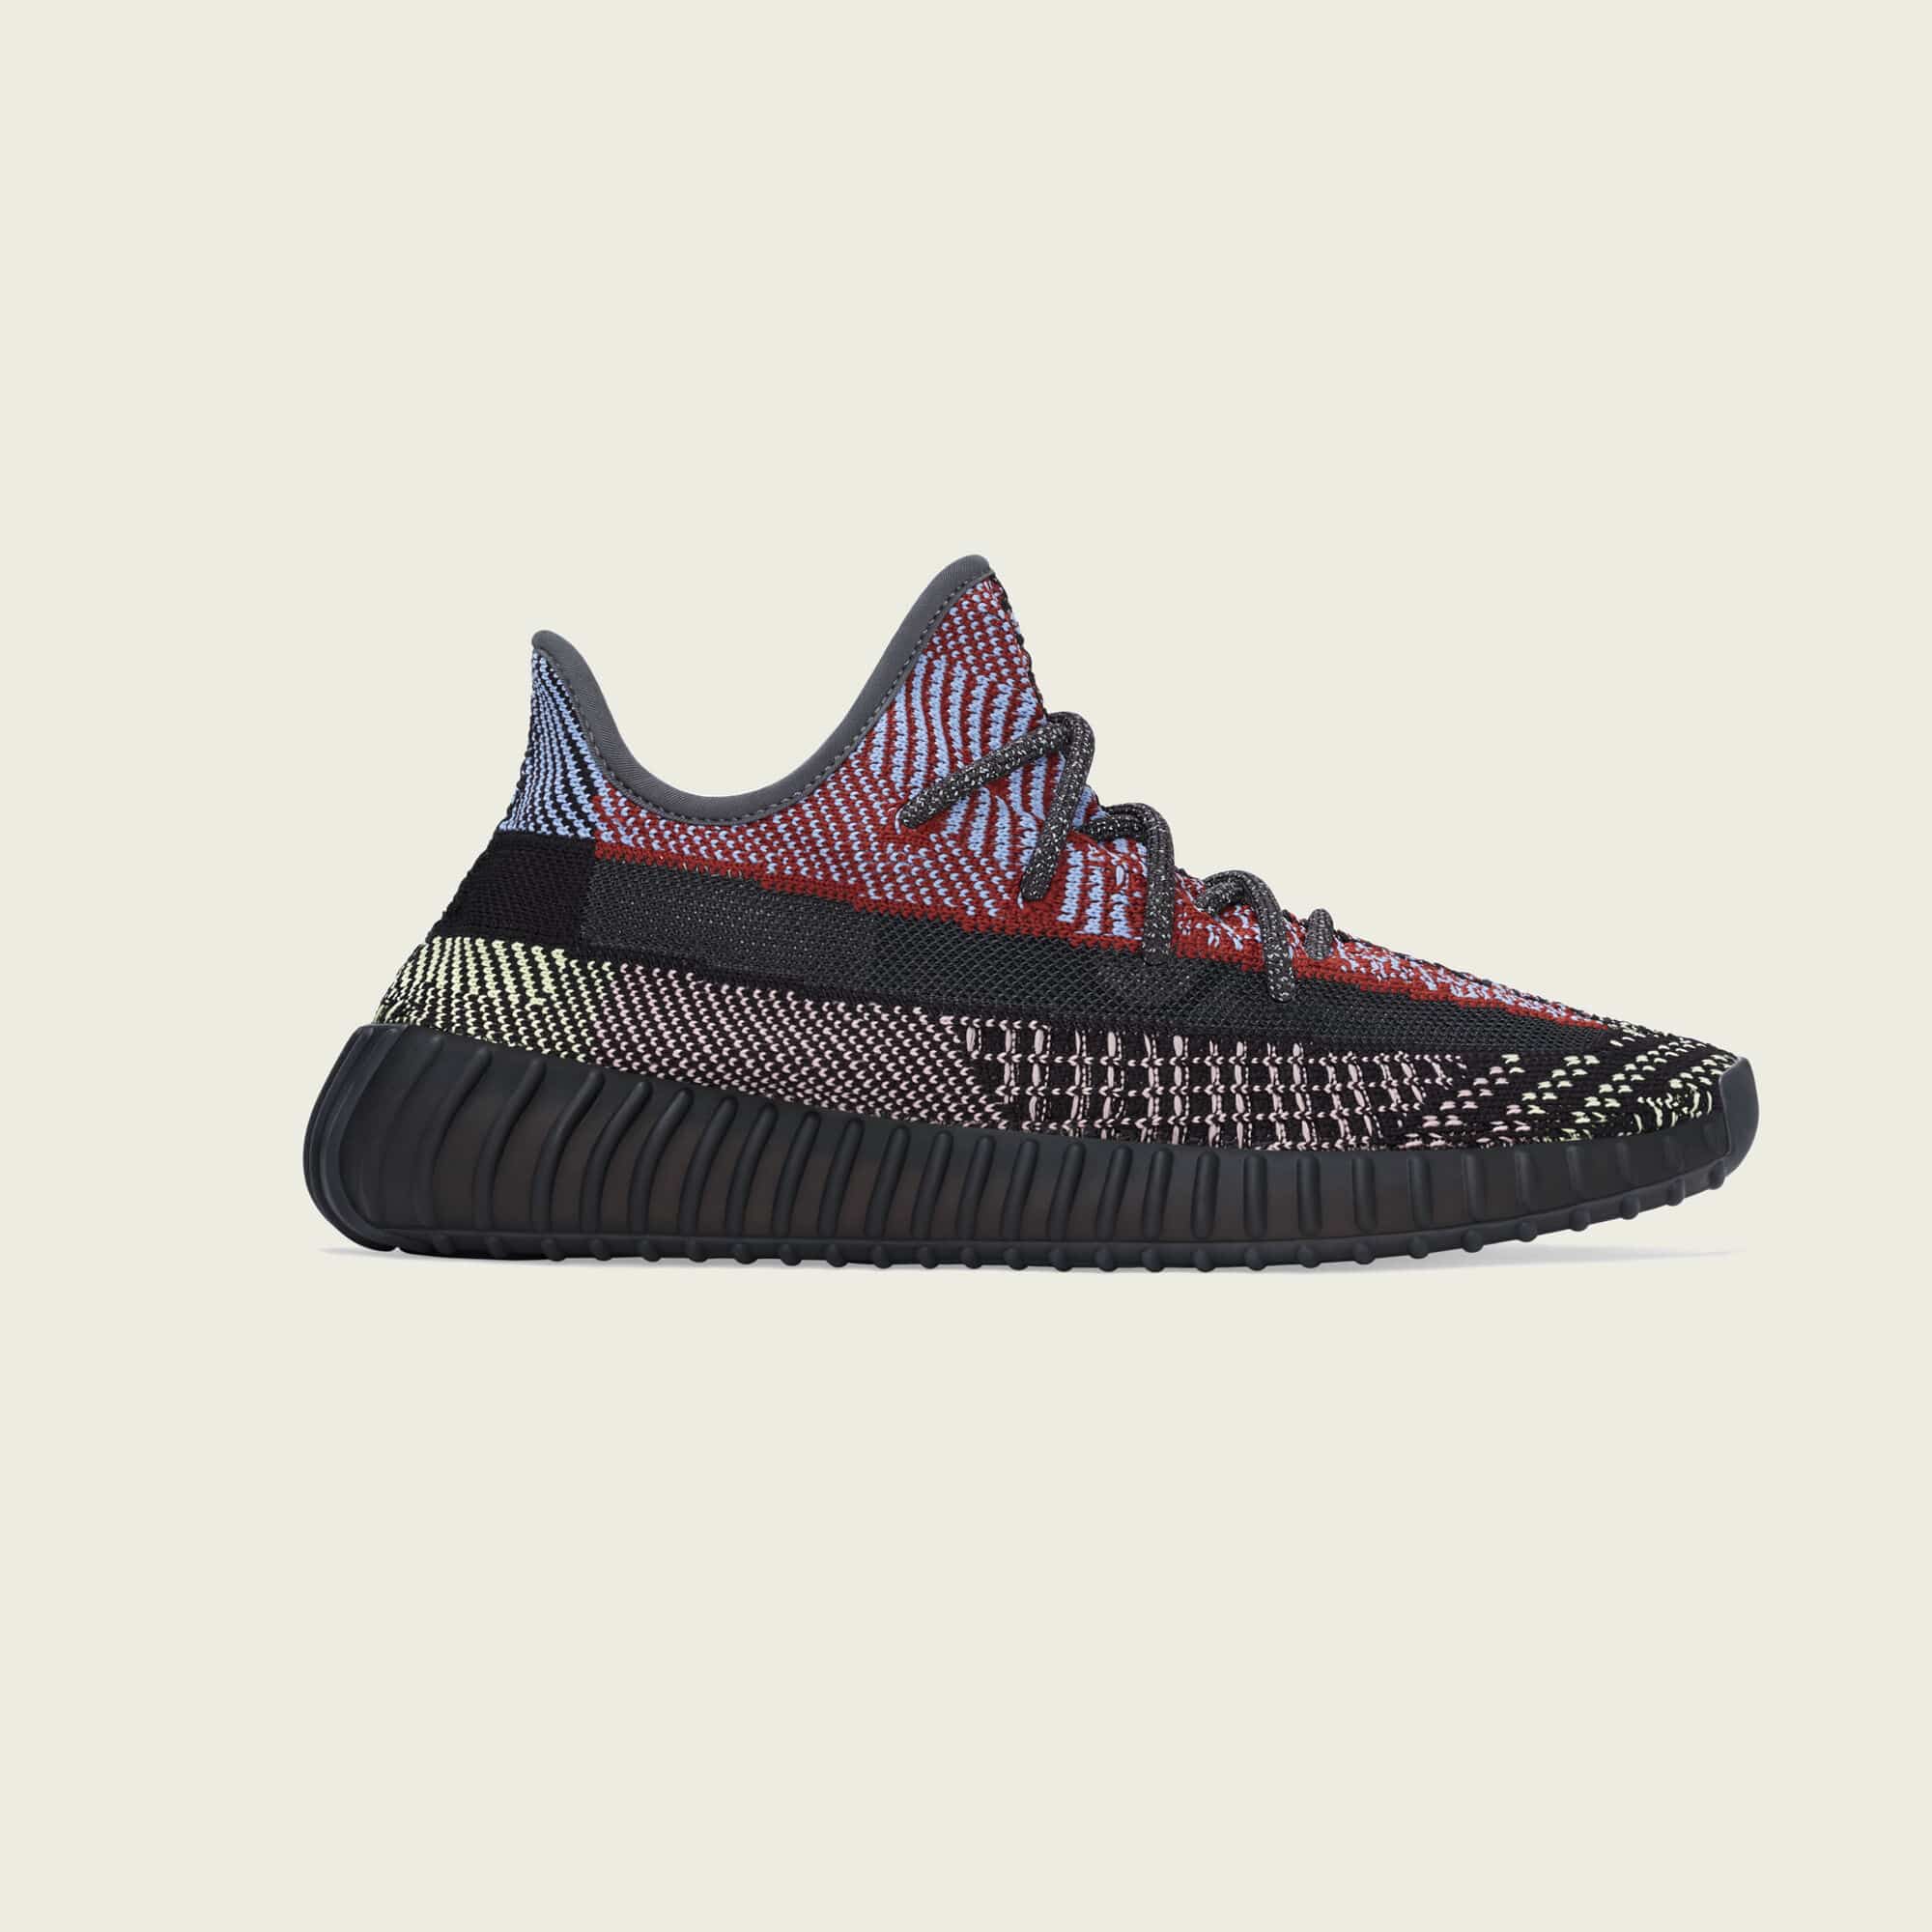 adidas Yeezy Boost 350 V2 Yecheil Releases